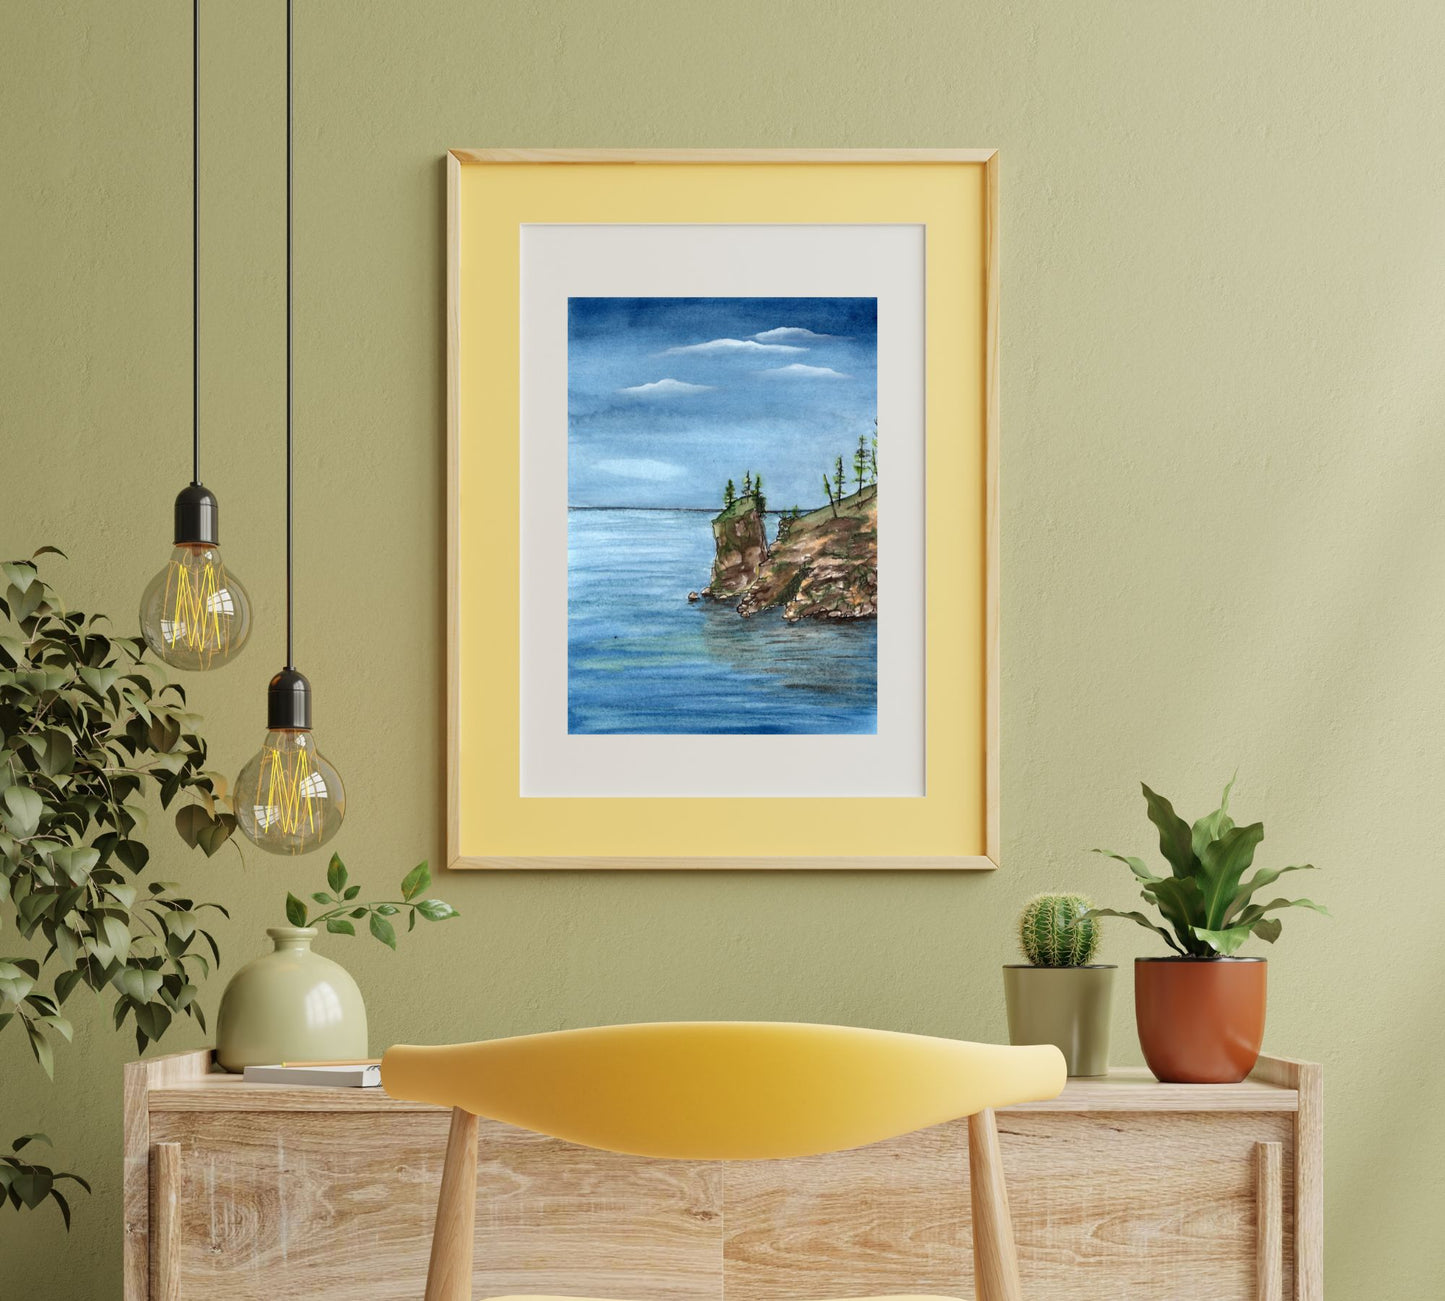 North Shore in Pen and Watercolor - Archival Quality Art Print